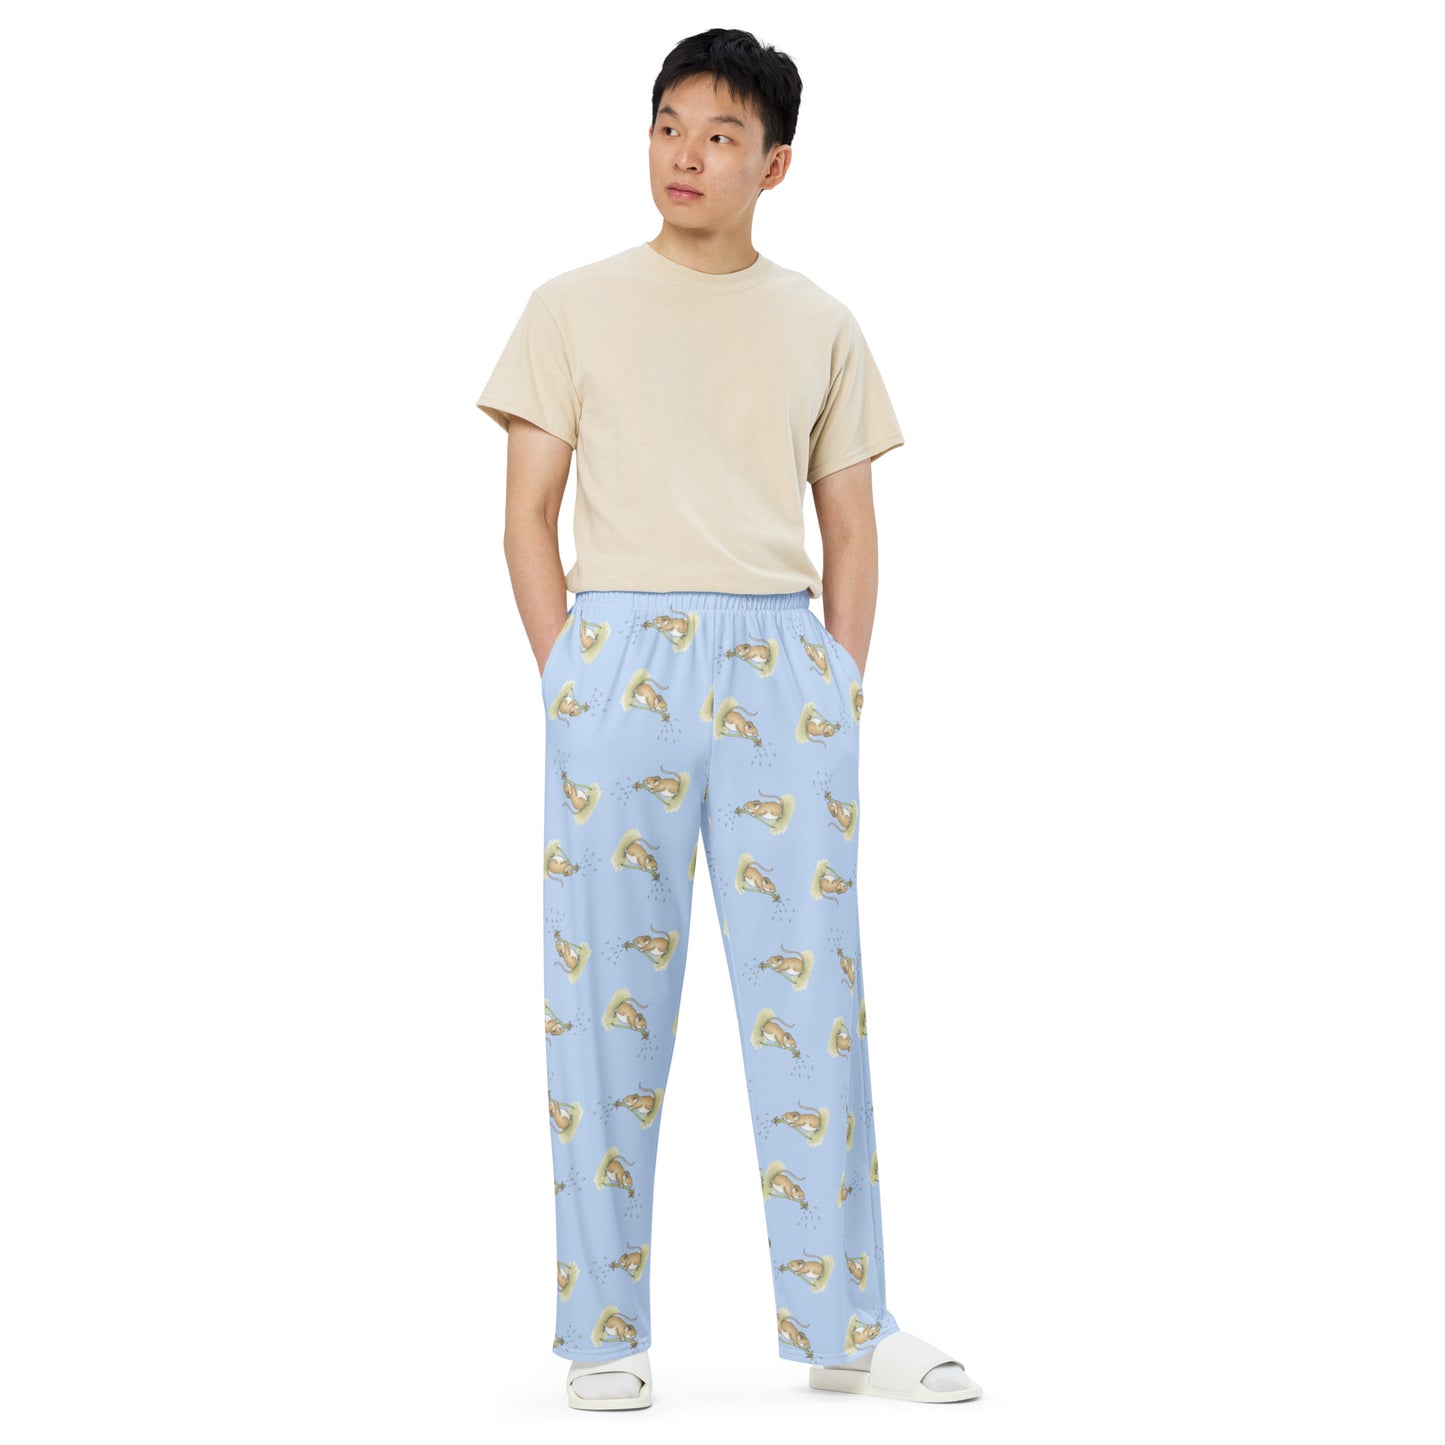 Unisex wide leg polyester pajama pants. Features dandelion wish patterned design on a light blue fabric. Has elastic waistband and white drawstring. Side pockets. Shown on male model.